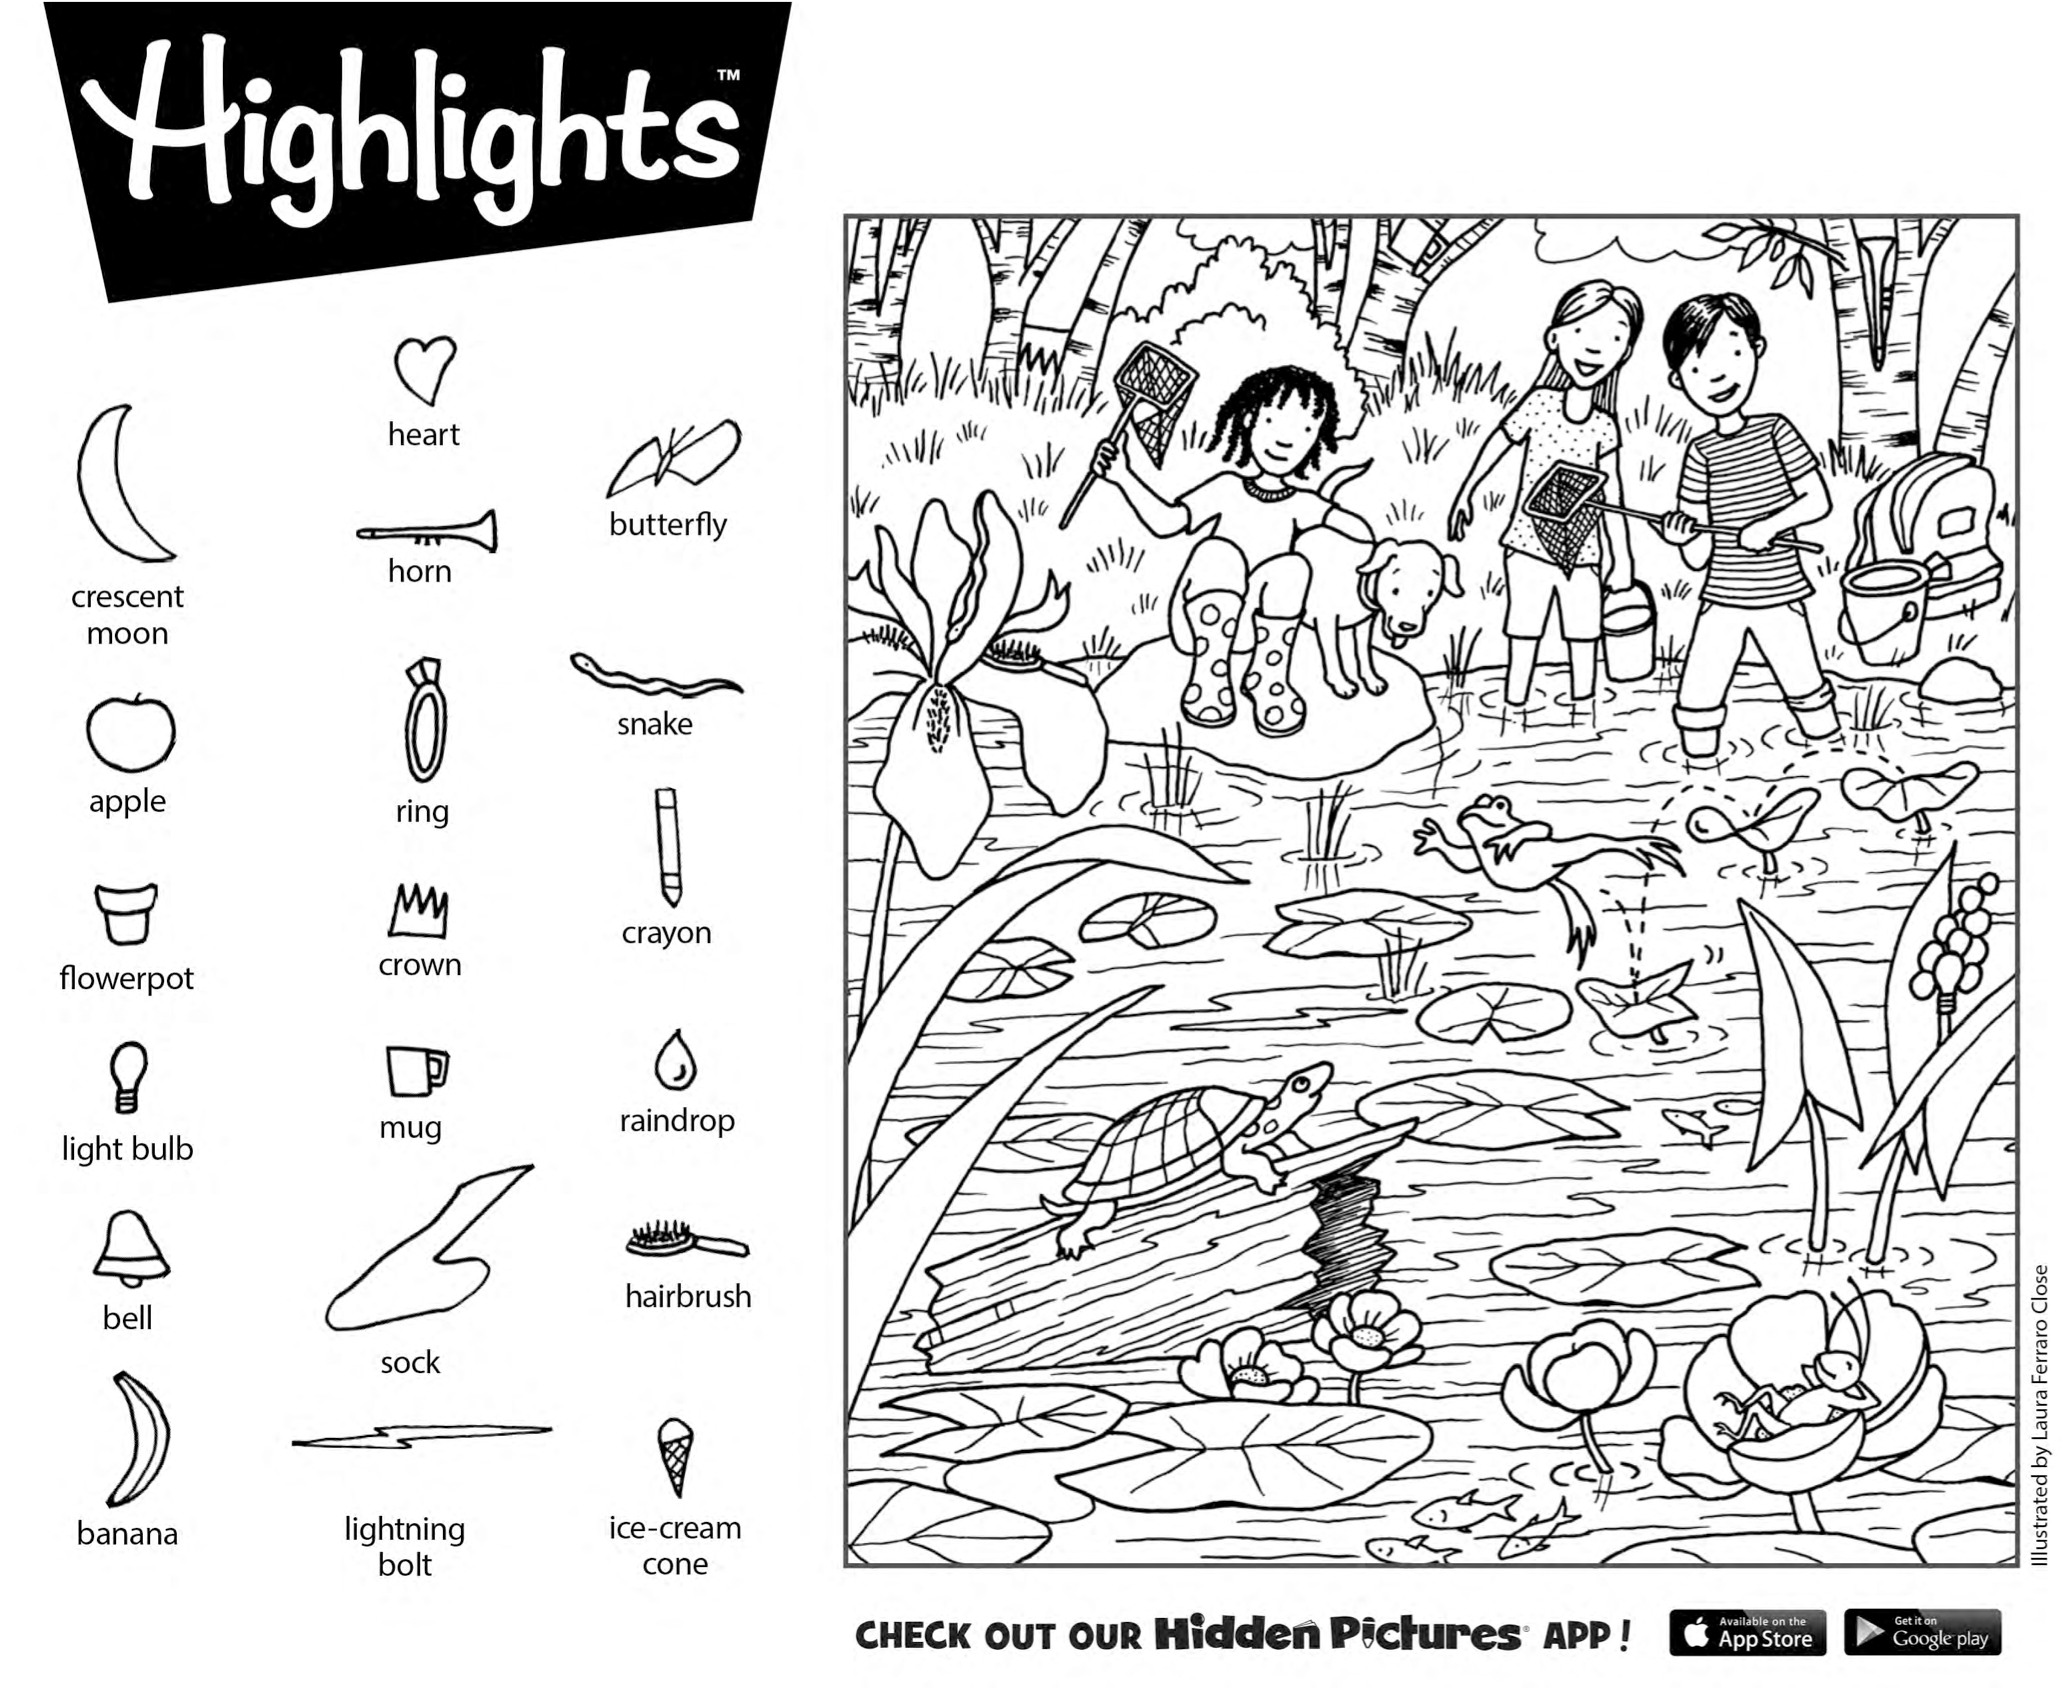 Download This Free Printable Hidden Pictures Puzzle From Highlights - Free Printable Hidden Pictures